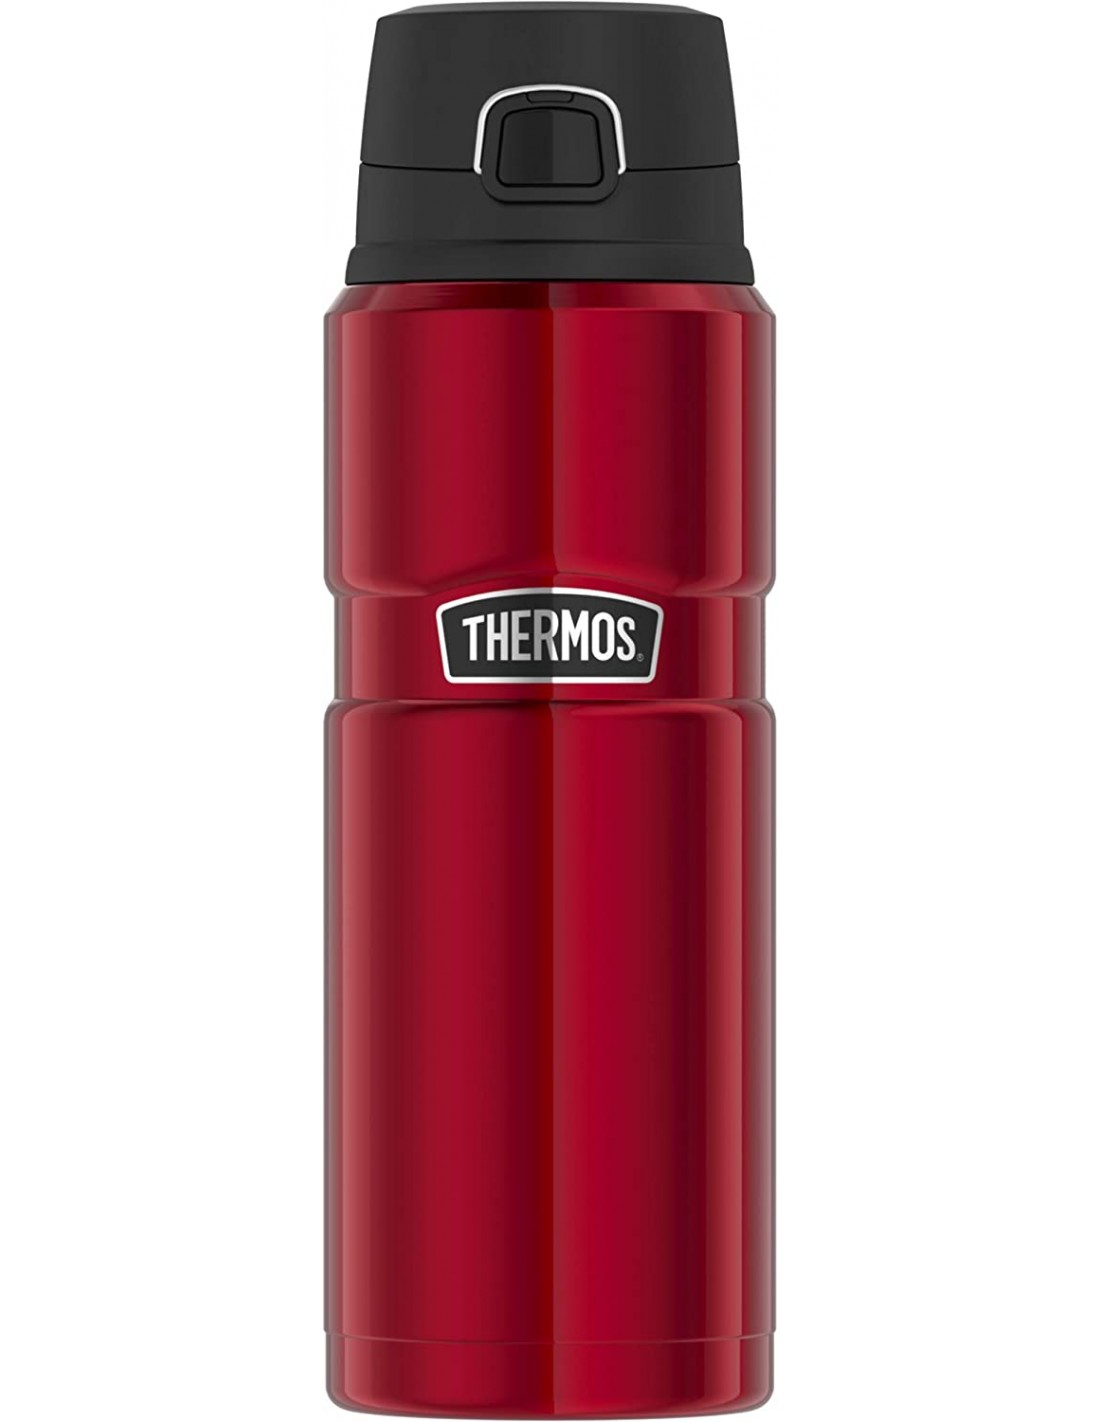 Thermos Isoliertrinkflasche Stainless King, cranberry red polished, 0,7 Liter Trinkflaschenfarbe - Red, Trinkflaschenvolumen - 0,7 Liter, von Thermos